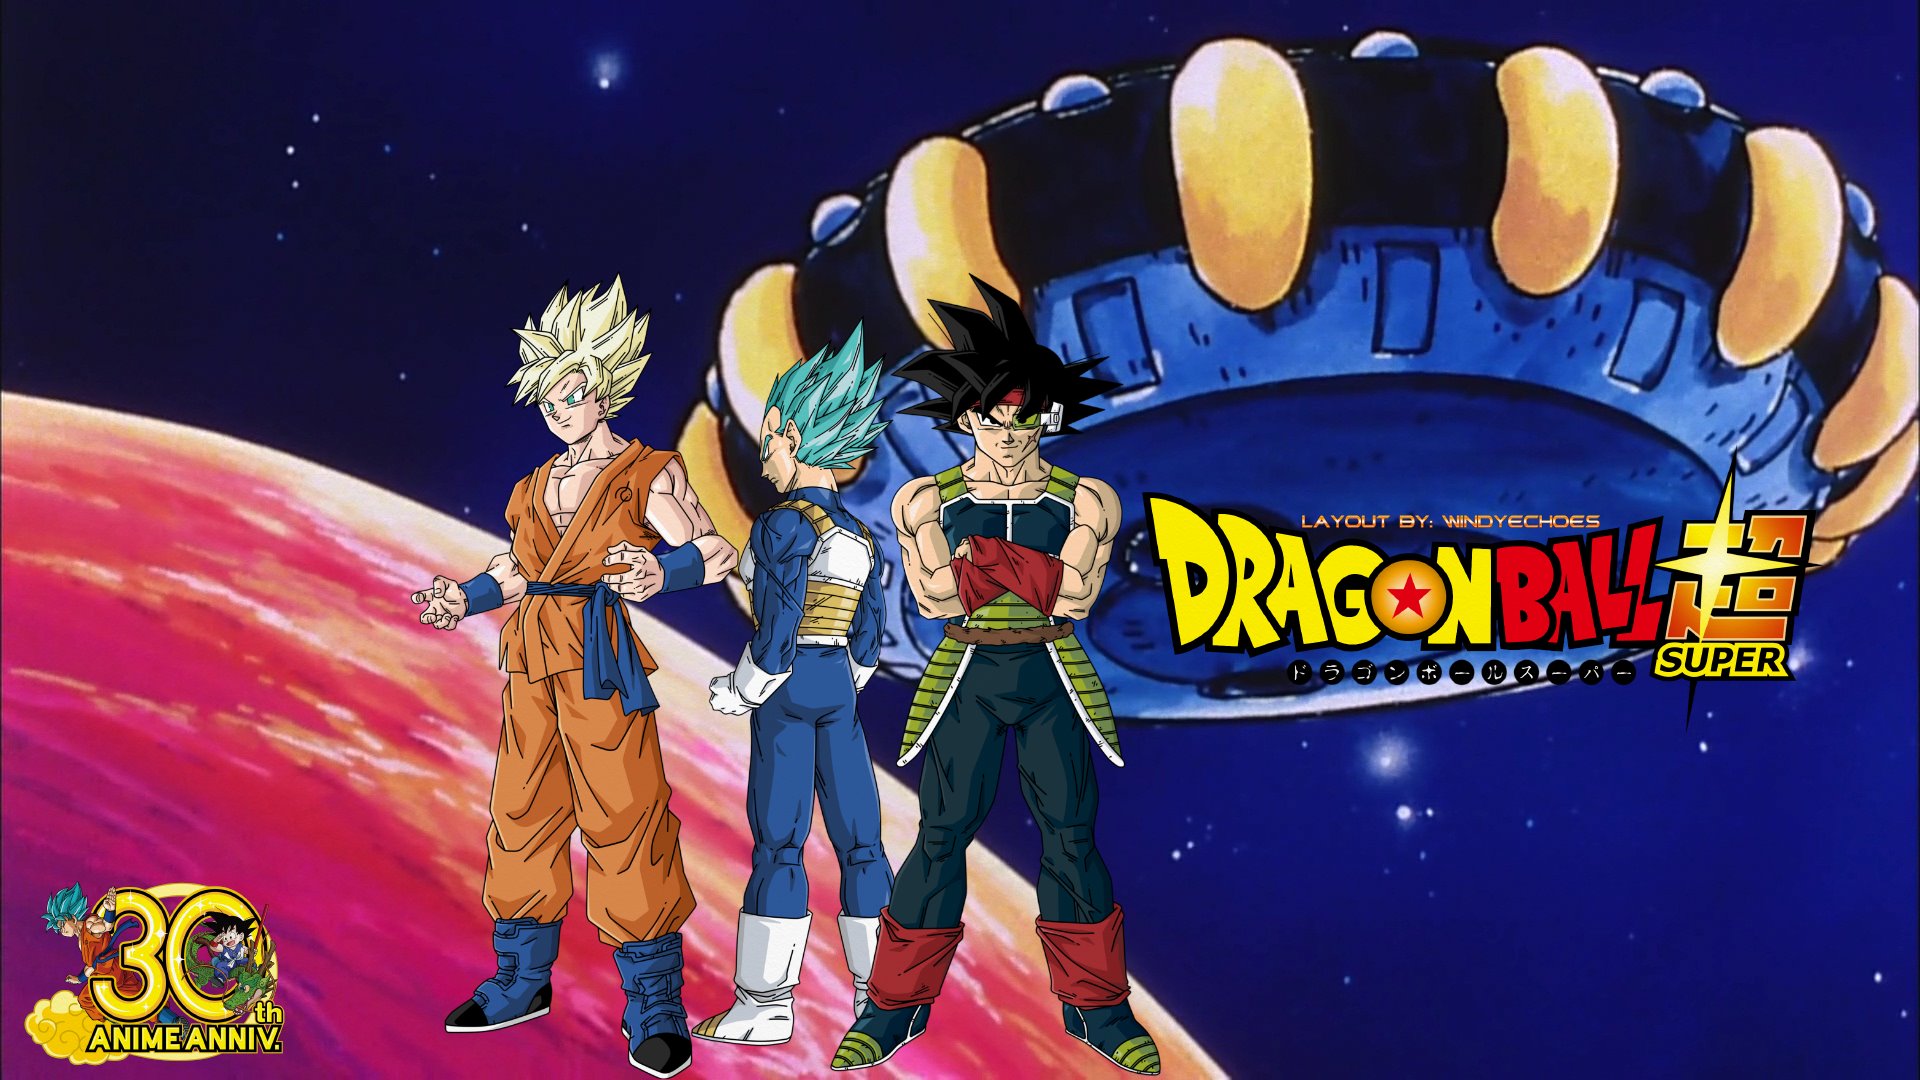 Dragon Ball Z And Super Wallpaper #1 by WindyEchoes on DeviantArt